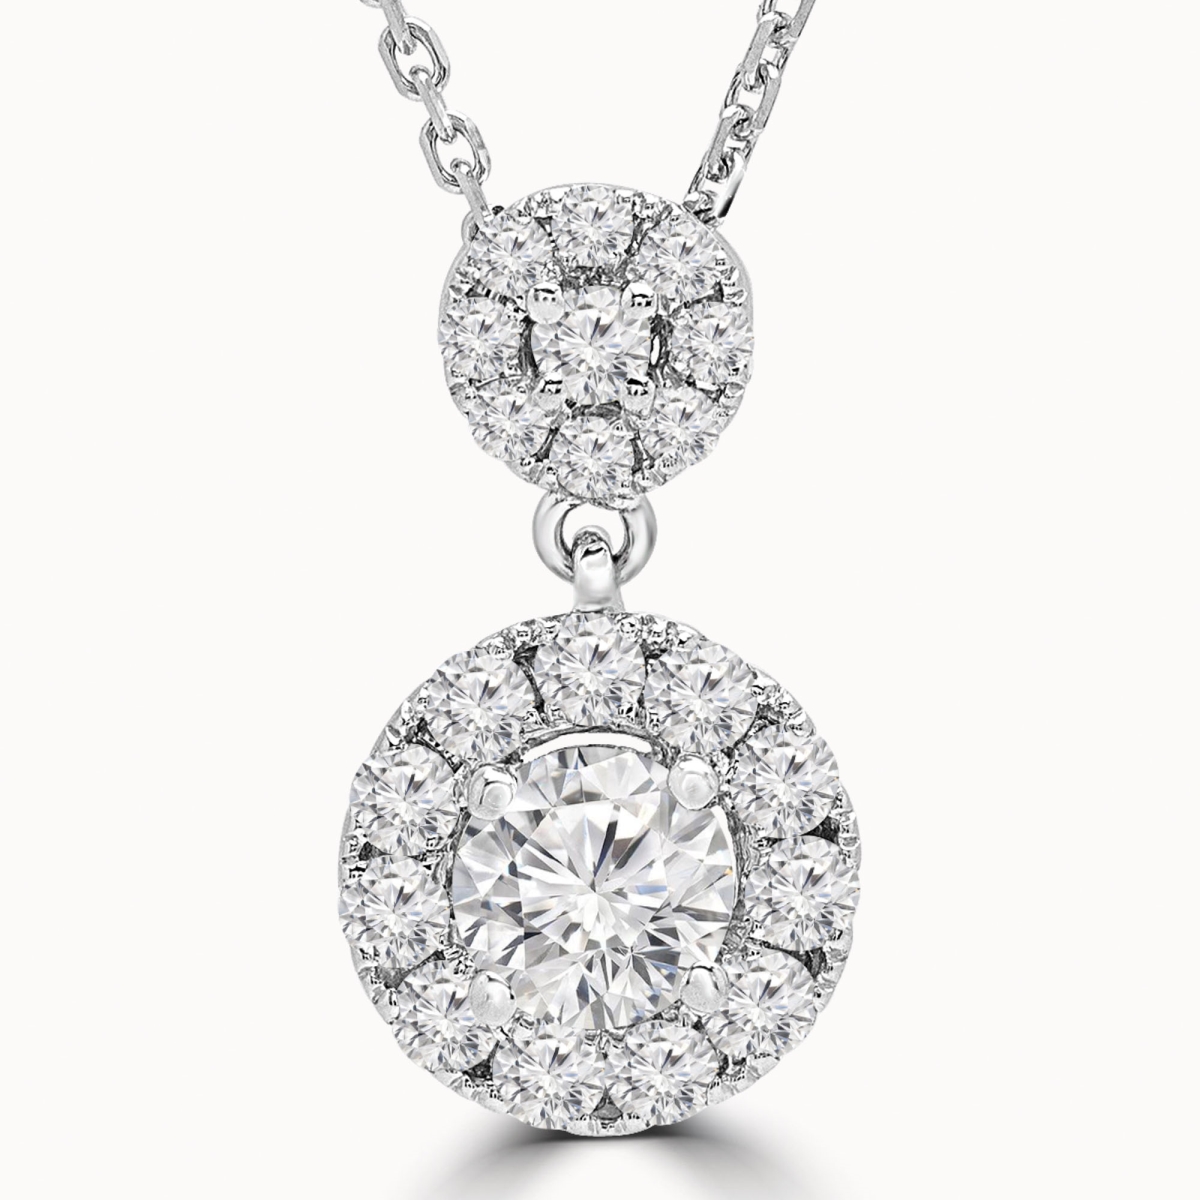 Md190532 0.9 Ctw Round Diamond Halo Pendant Necklace In 18k White Gold